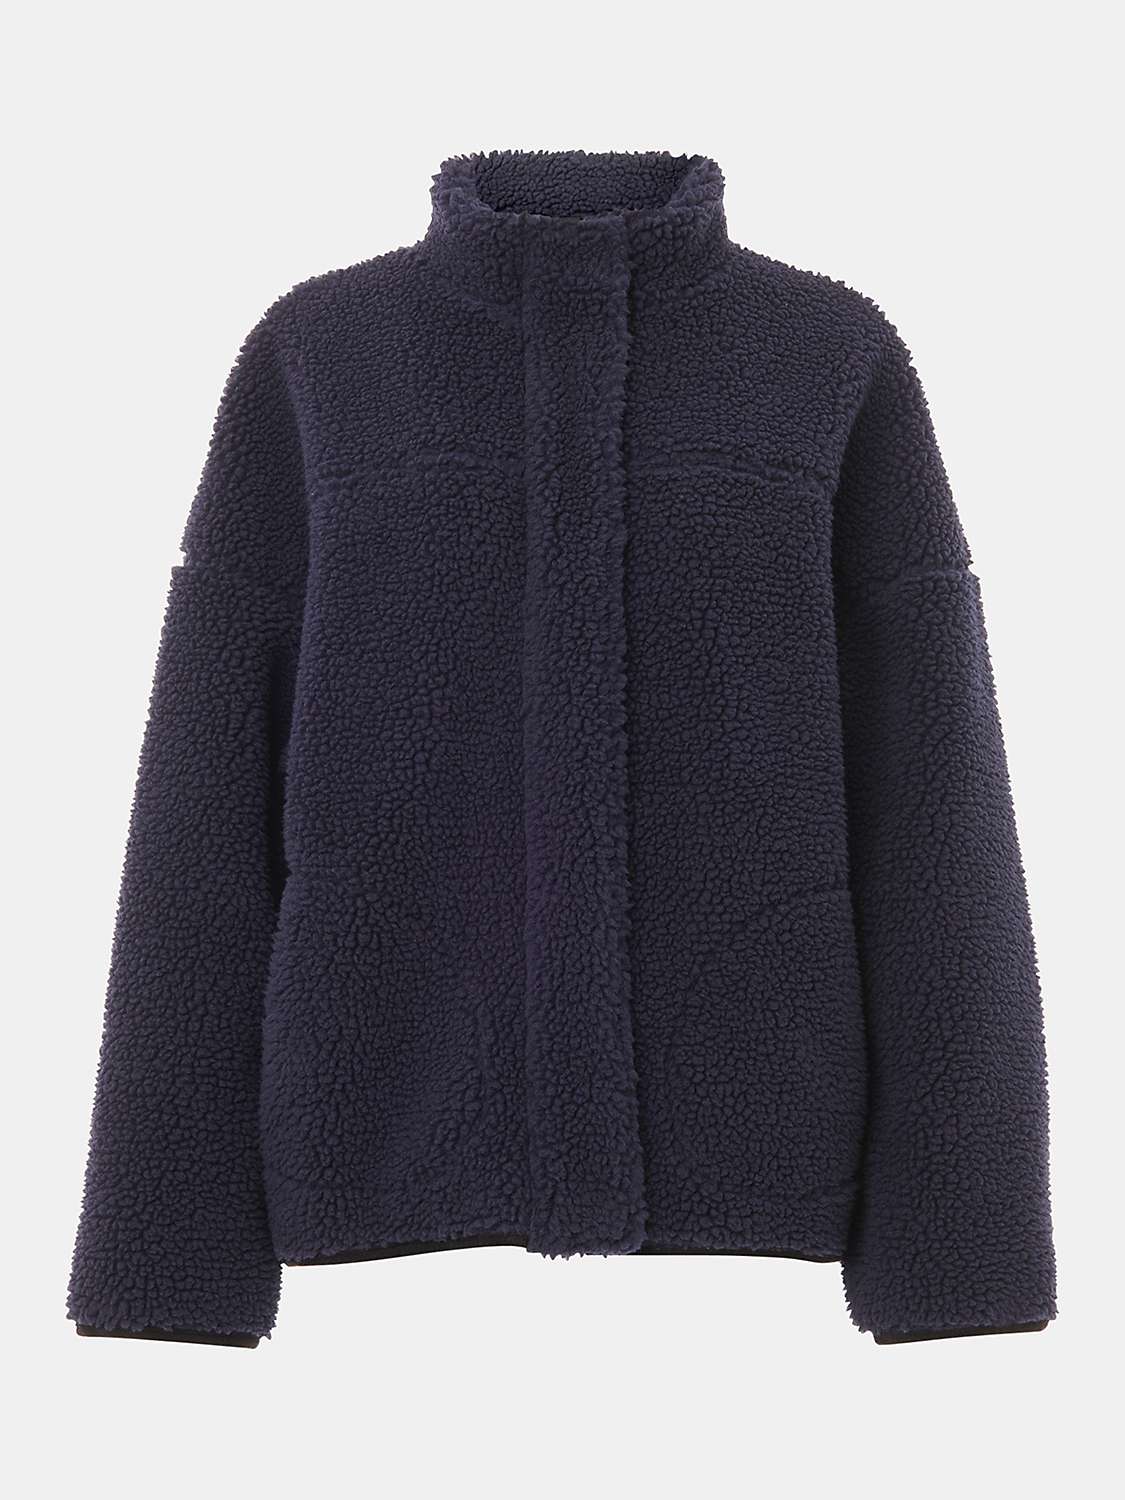 Buy Whistles Faux Teddy Bomber Jacket, Navy Online at johnlewis.com